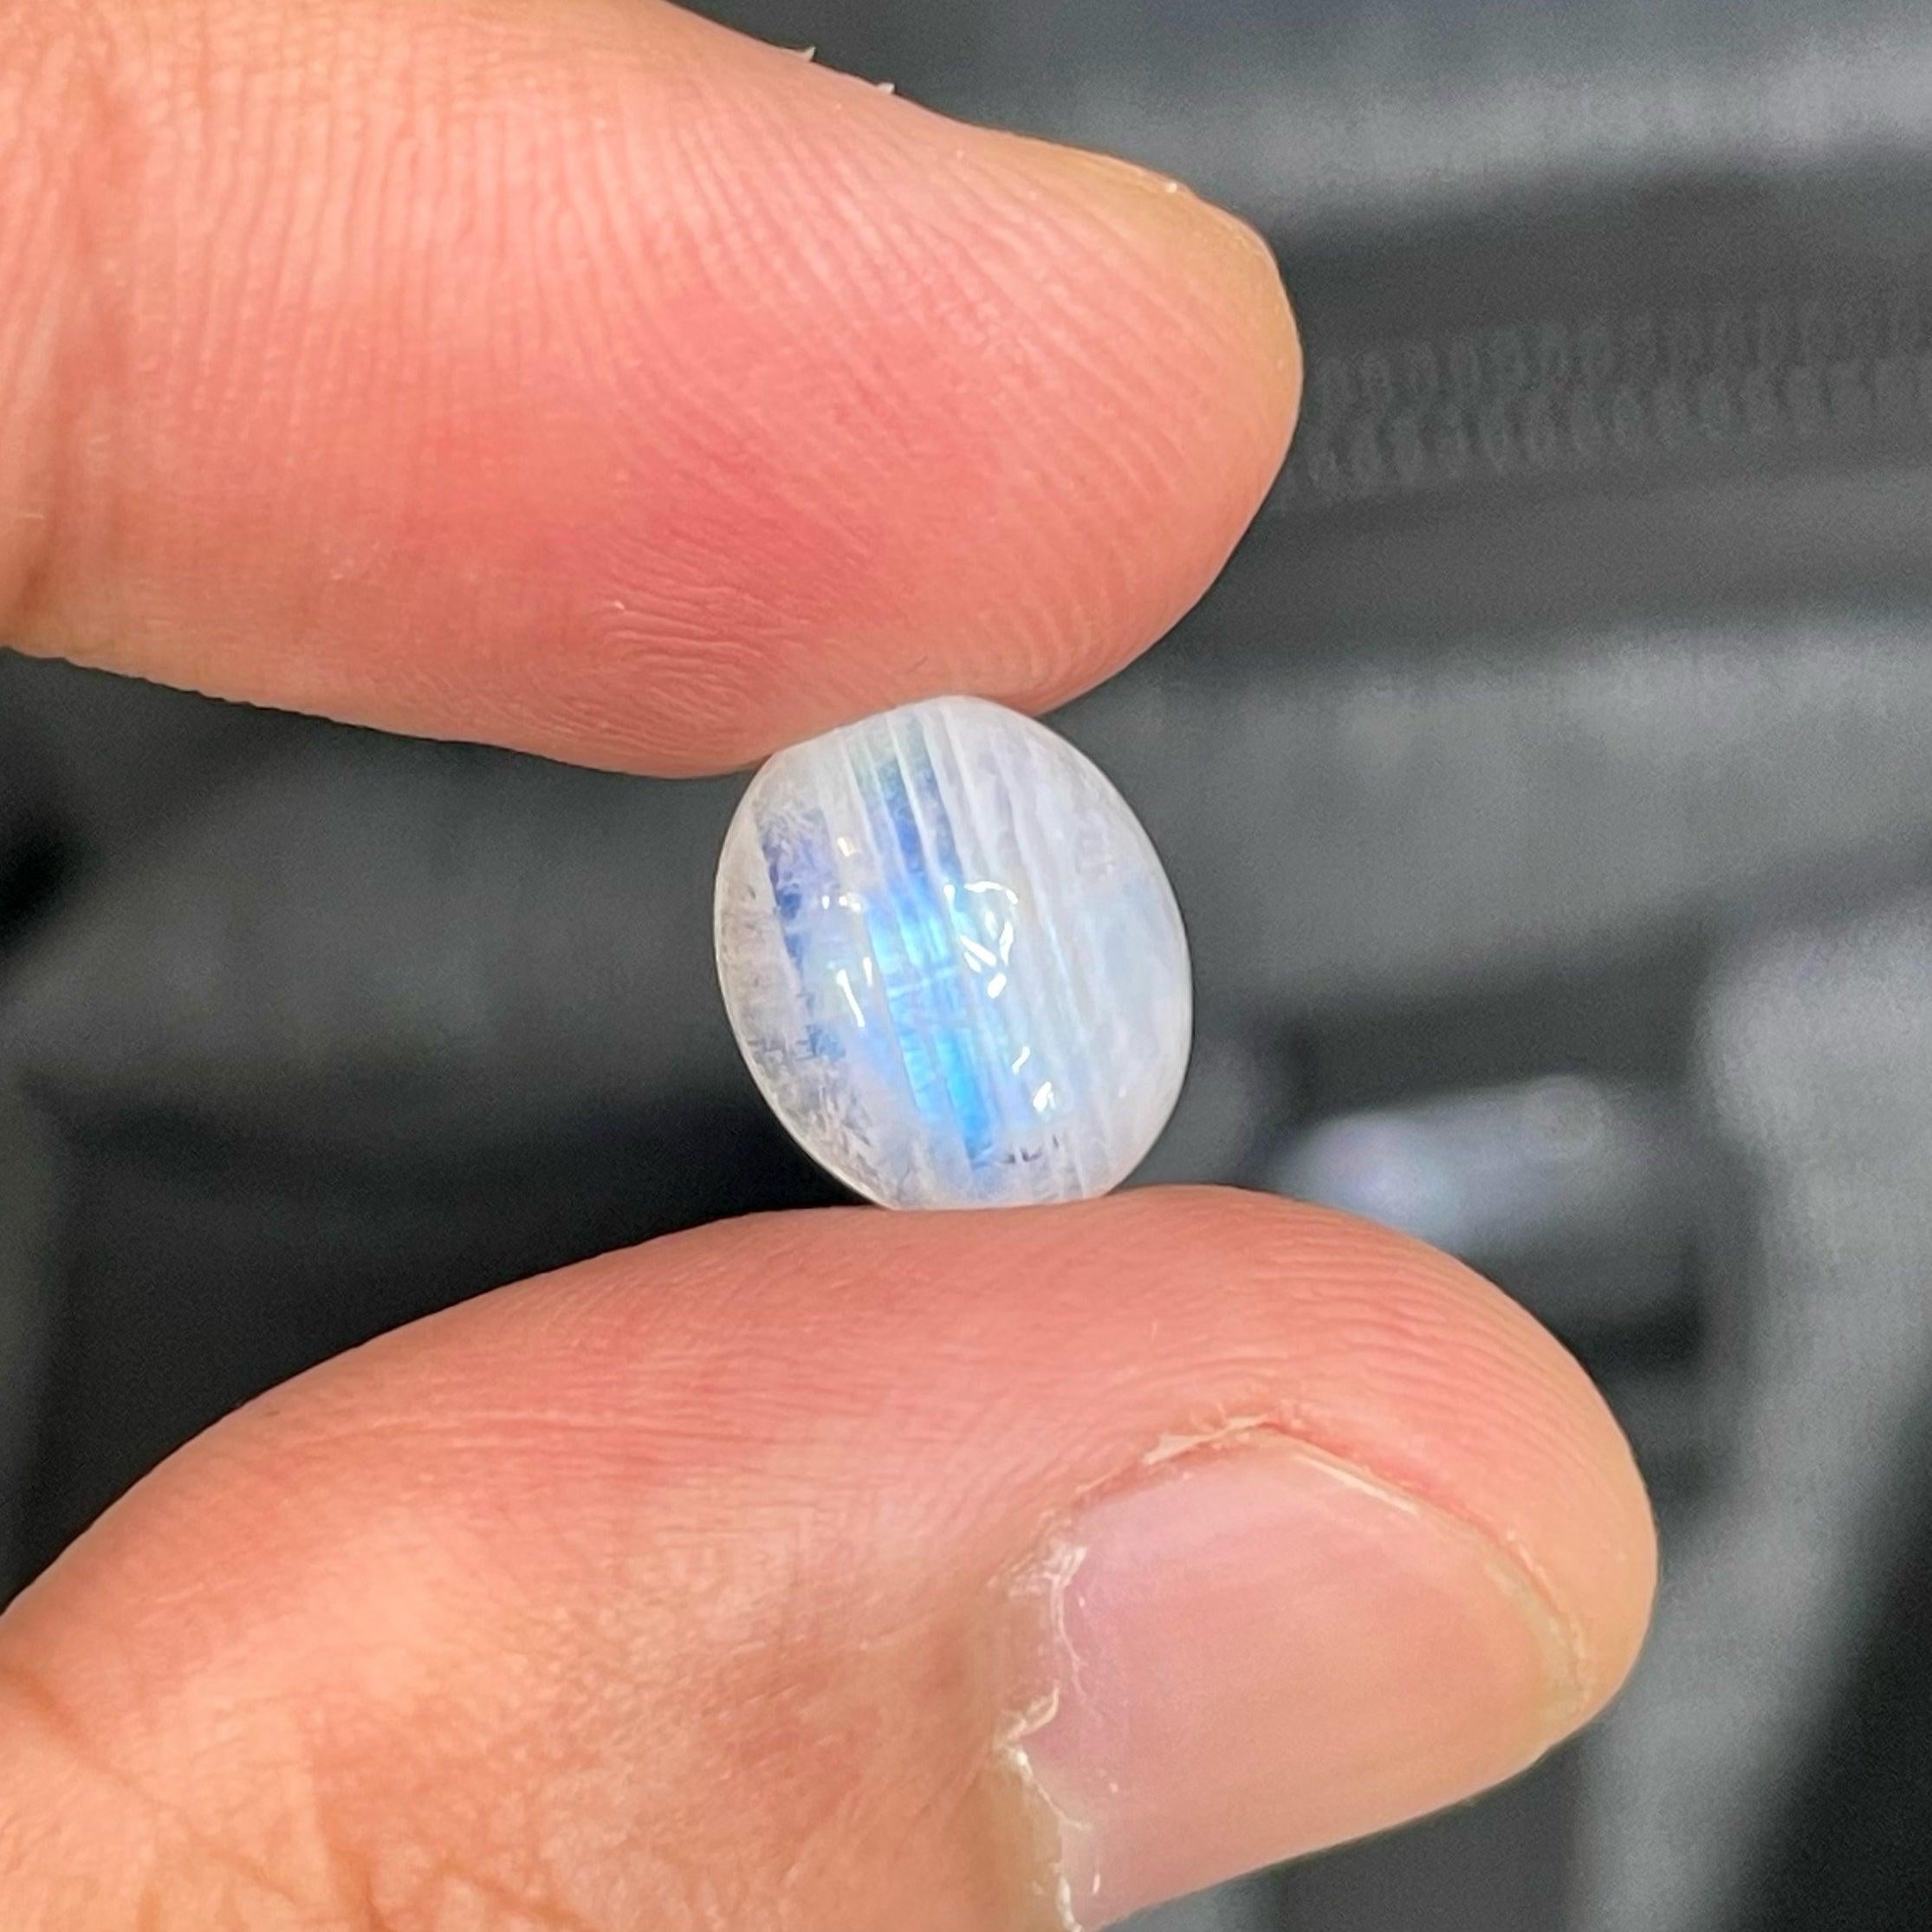 Spectacular Natural Loose Moonstone Gemstone, available for sale at wholesale price, natural high-quality 4.30 carats Diaphaneity Translucent clarity, certified Moonstone from India.

Product Information:
GEMSTONE NAME: Spectacular Natural Loose